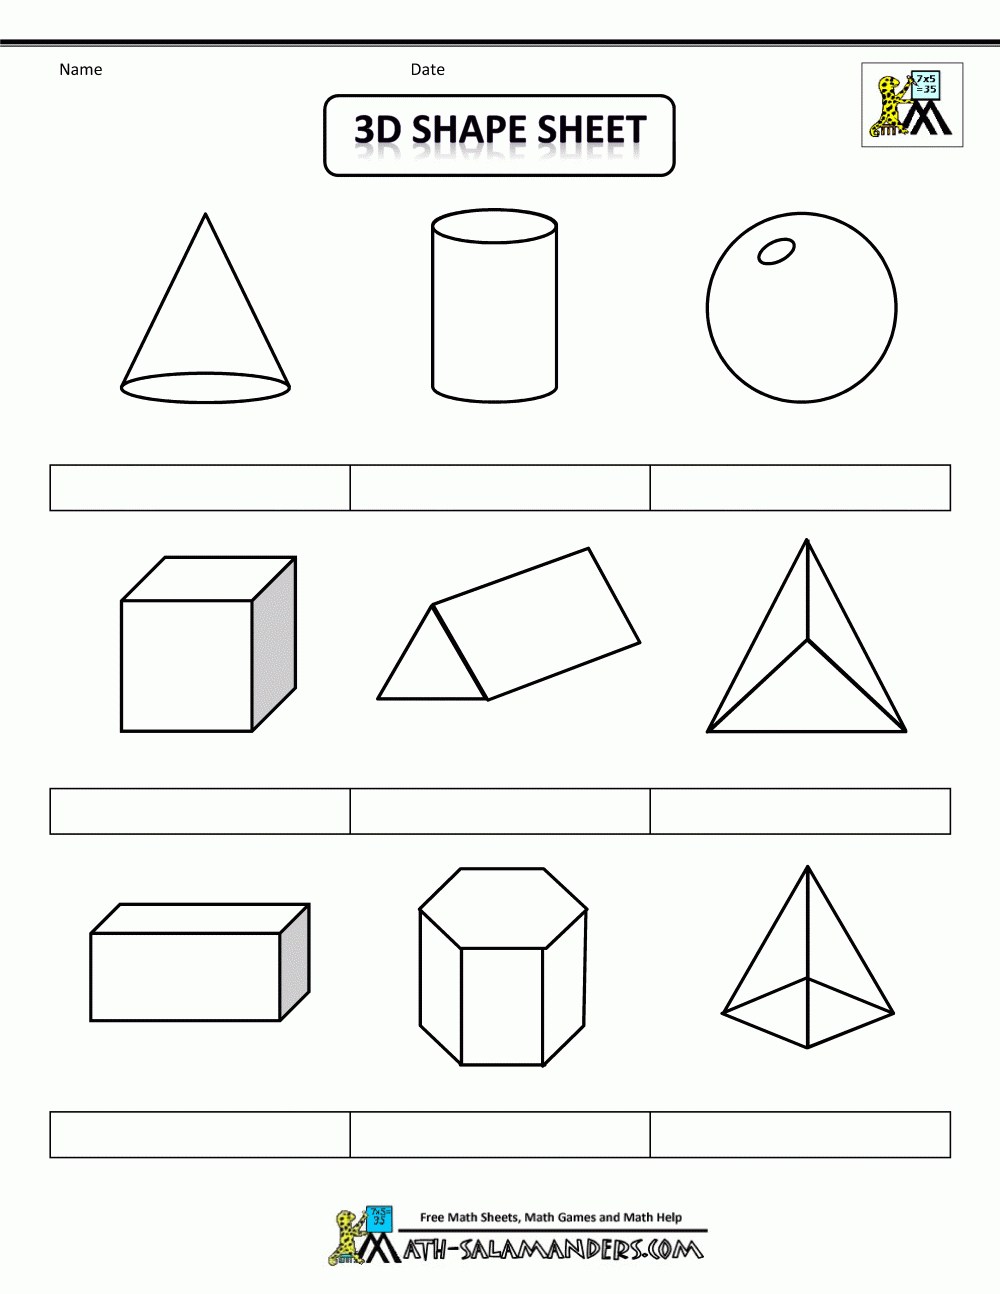 Printable Shapes 2D And 3D - Free Printable Shapes Templates